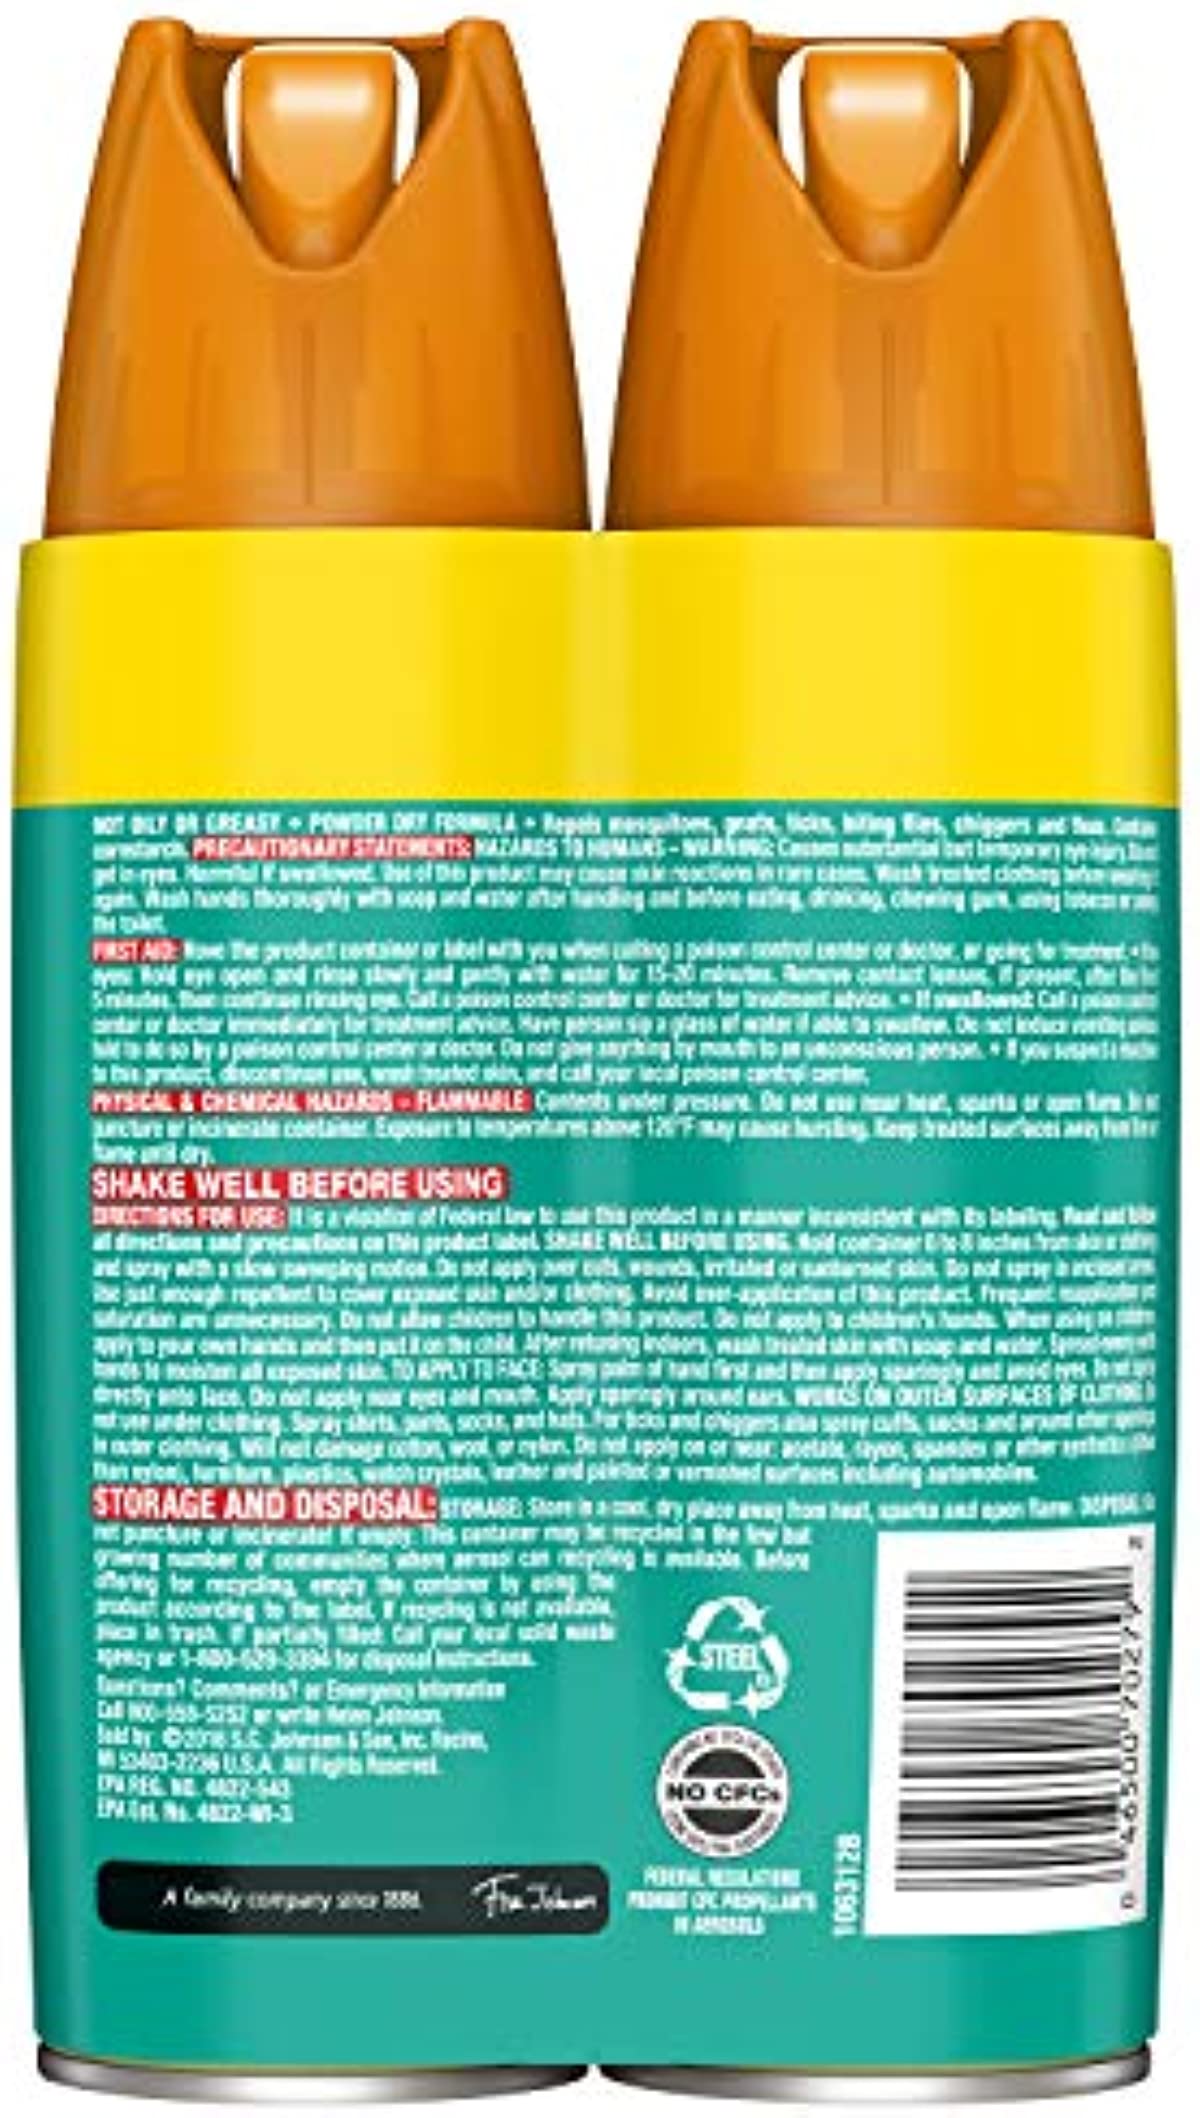 OFF! Family Care Insect & Mosquito Repellent I, Smooth & Dry Bug Spray for the Beach, Backyard, Picnics and More, 4 oz. (Pack of 2)